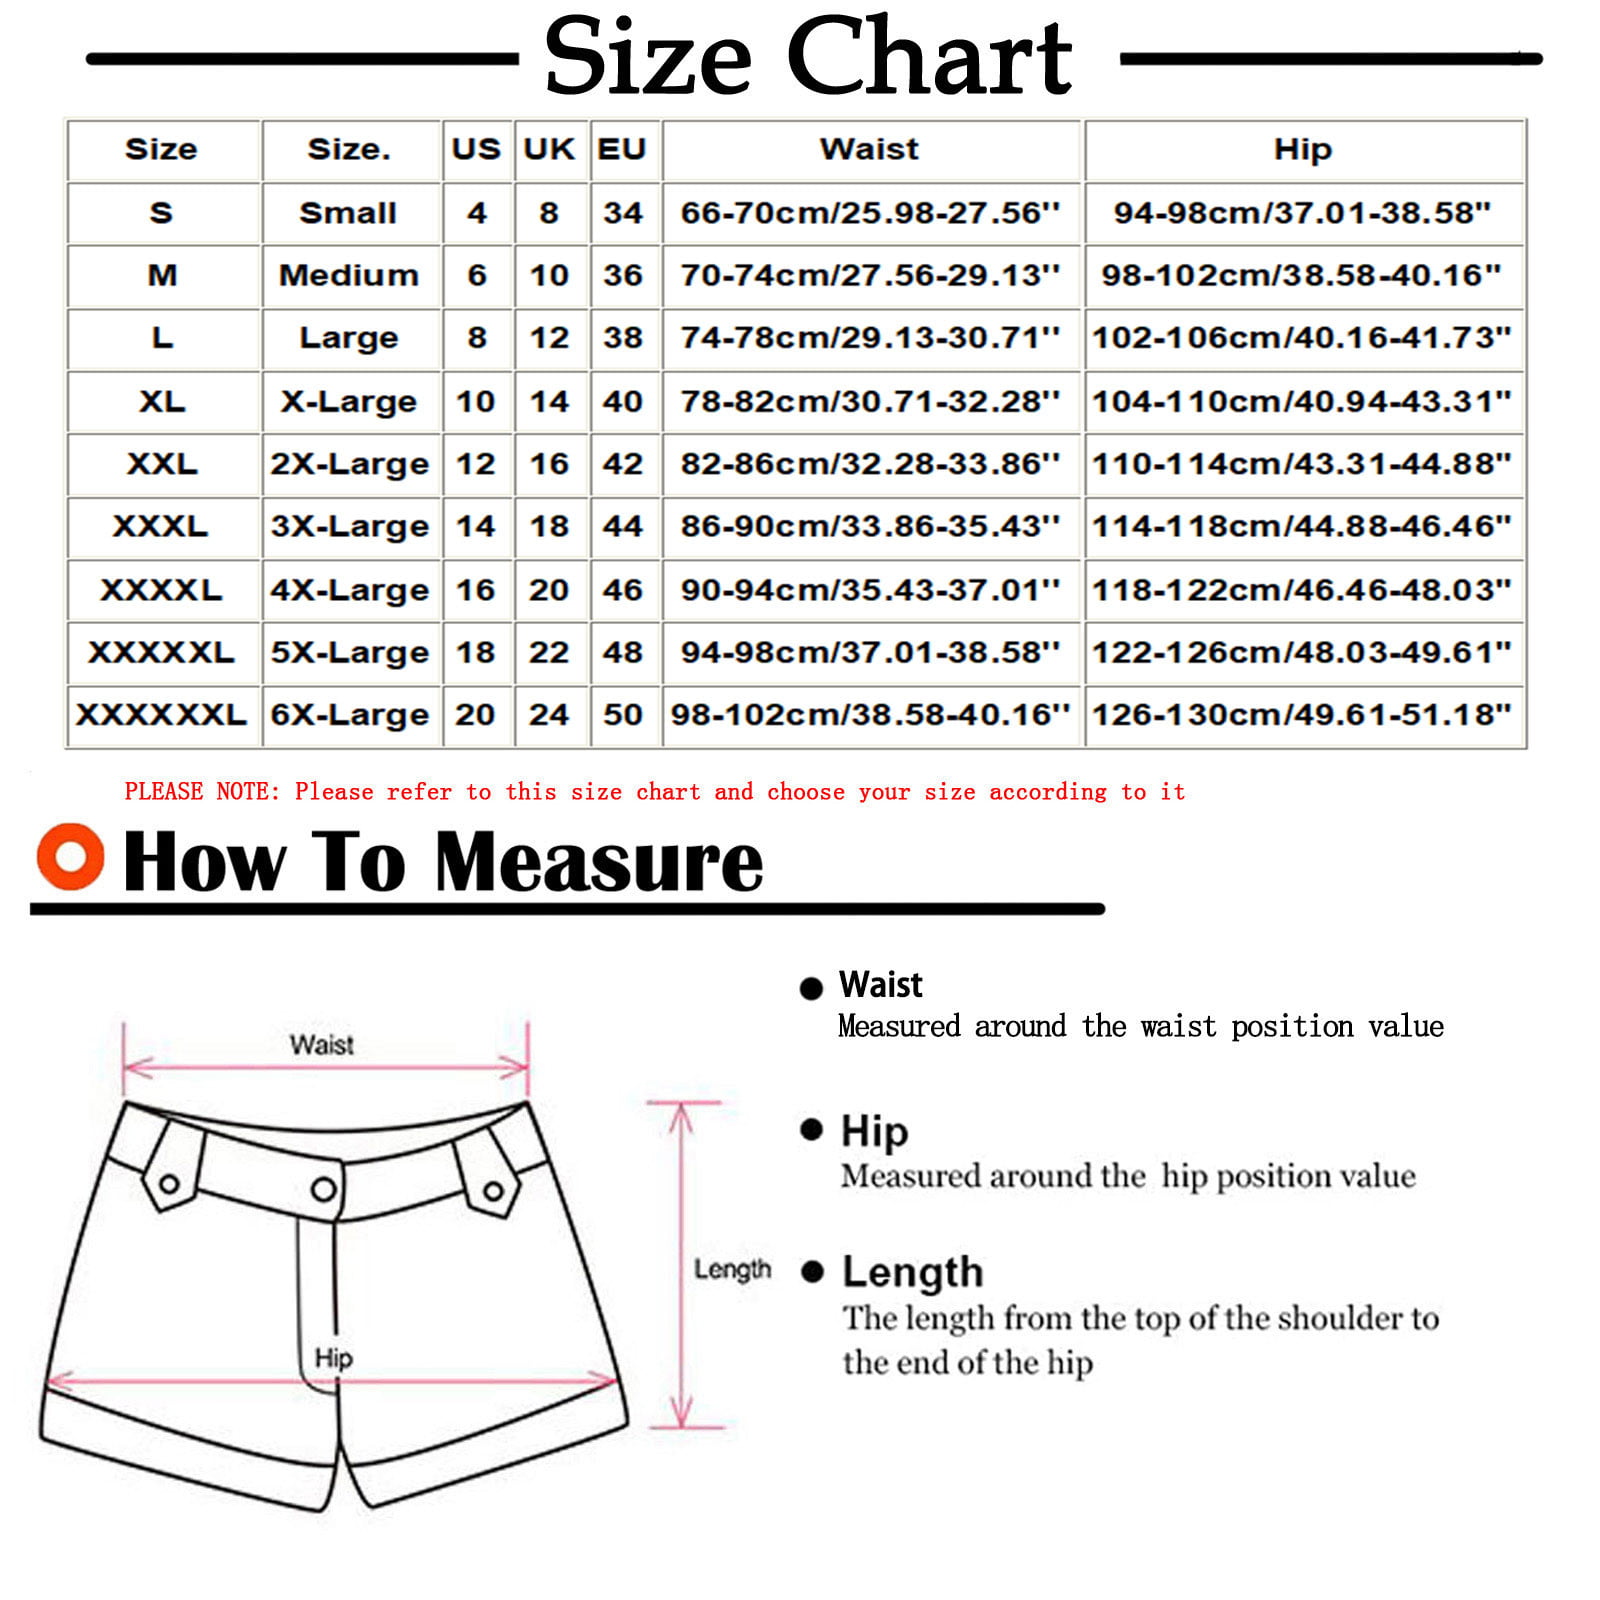 YYDGH Shapewear for Women Tummy Control Body Shaper Shorts Butt Lifter  Panties Lace High Waisted Underwear Slimming Panties Beige XXL 